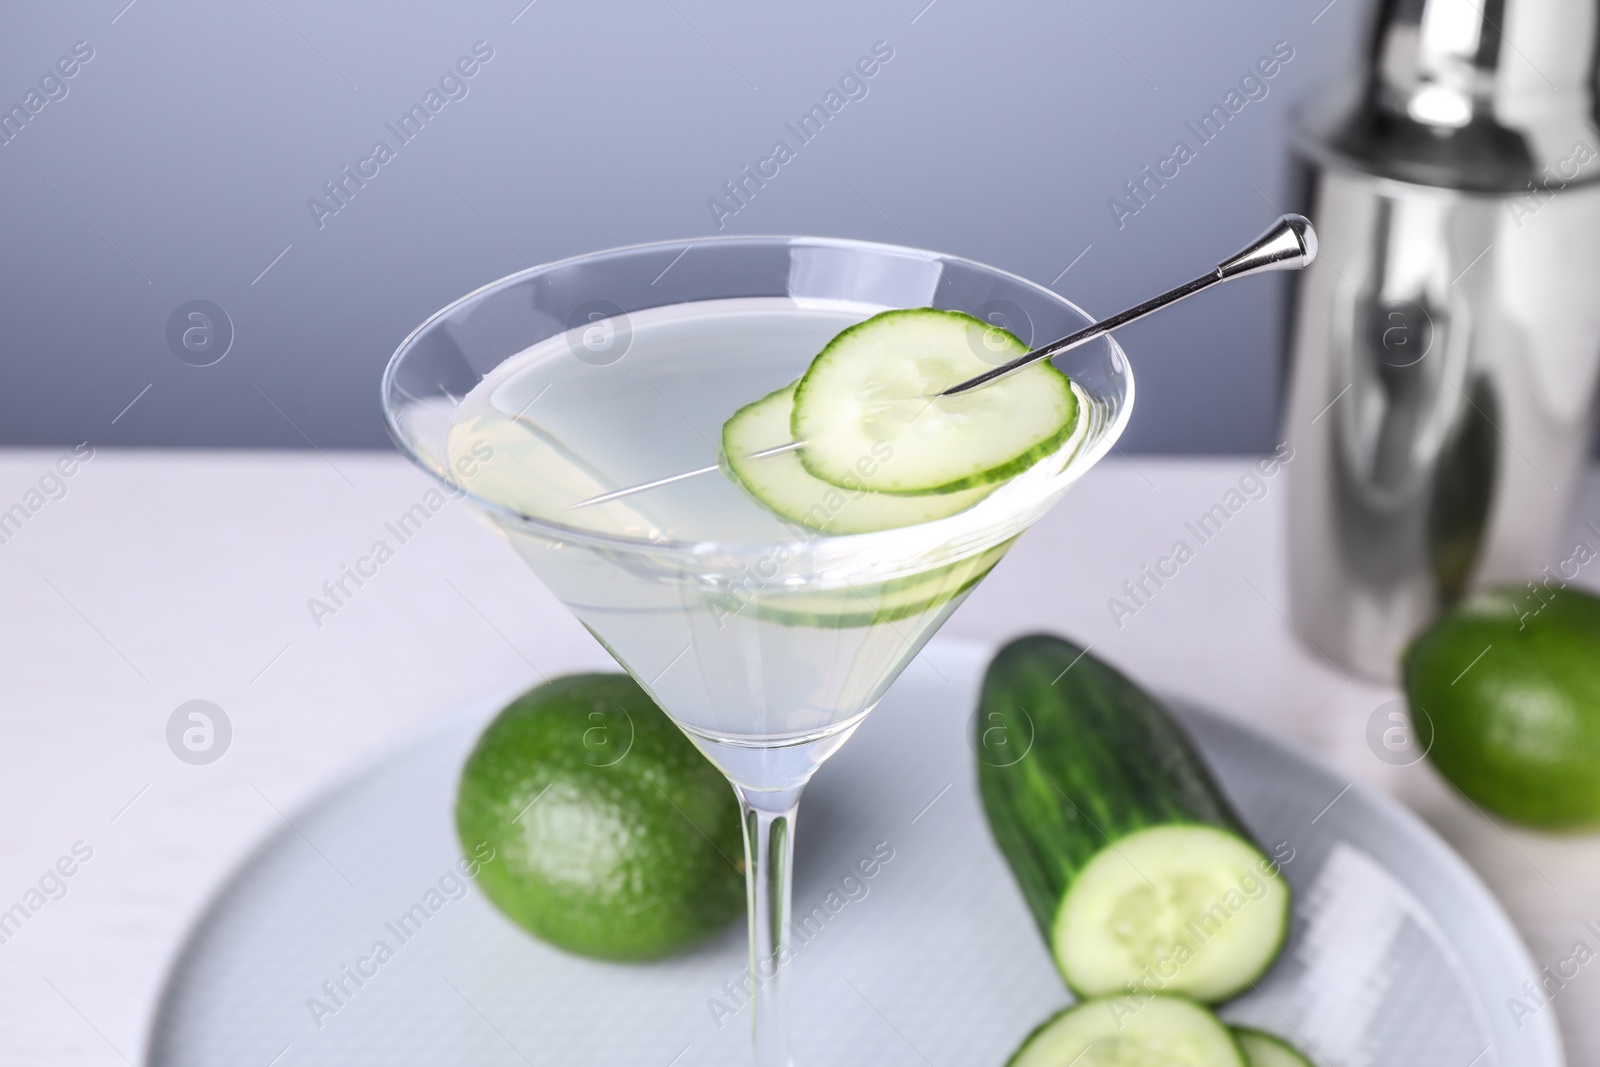 Photo of Composition with glass of cucumber martini on table against color background, closeup